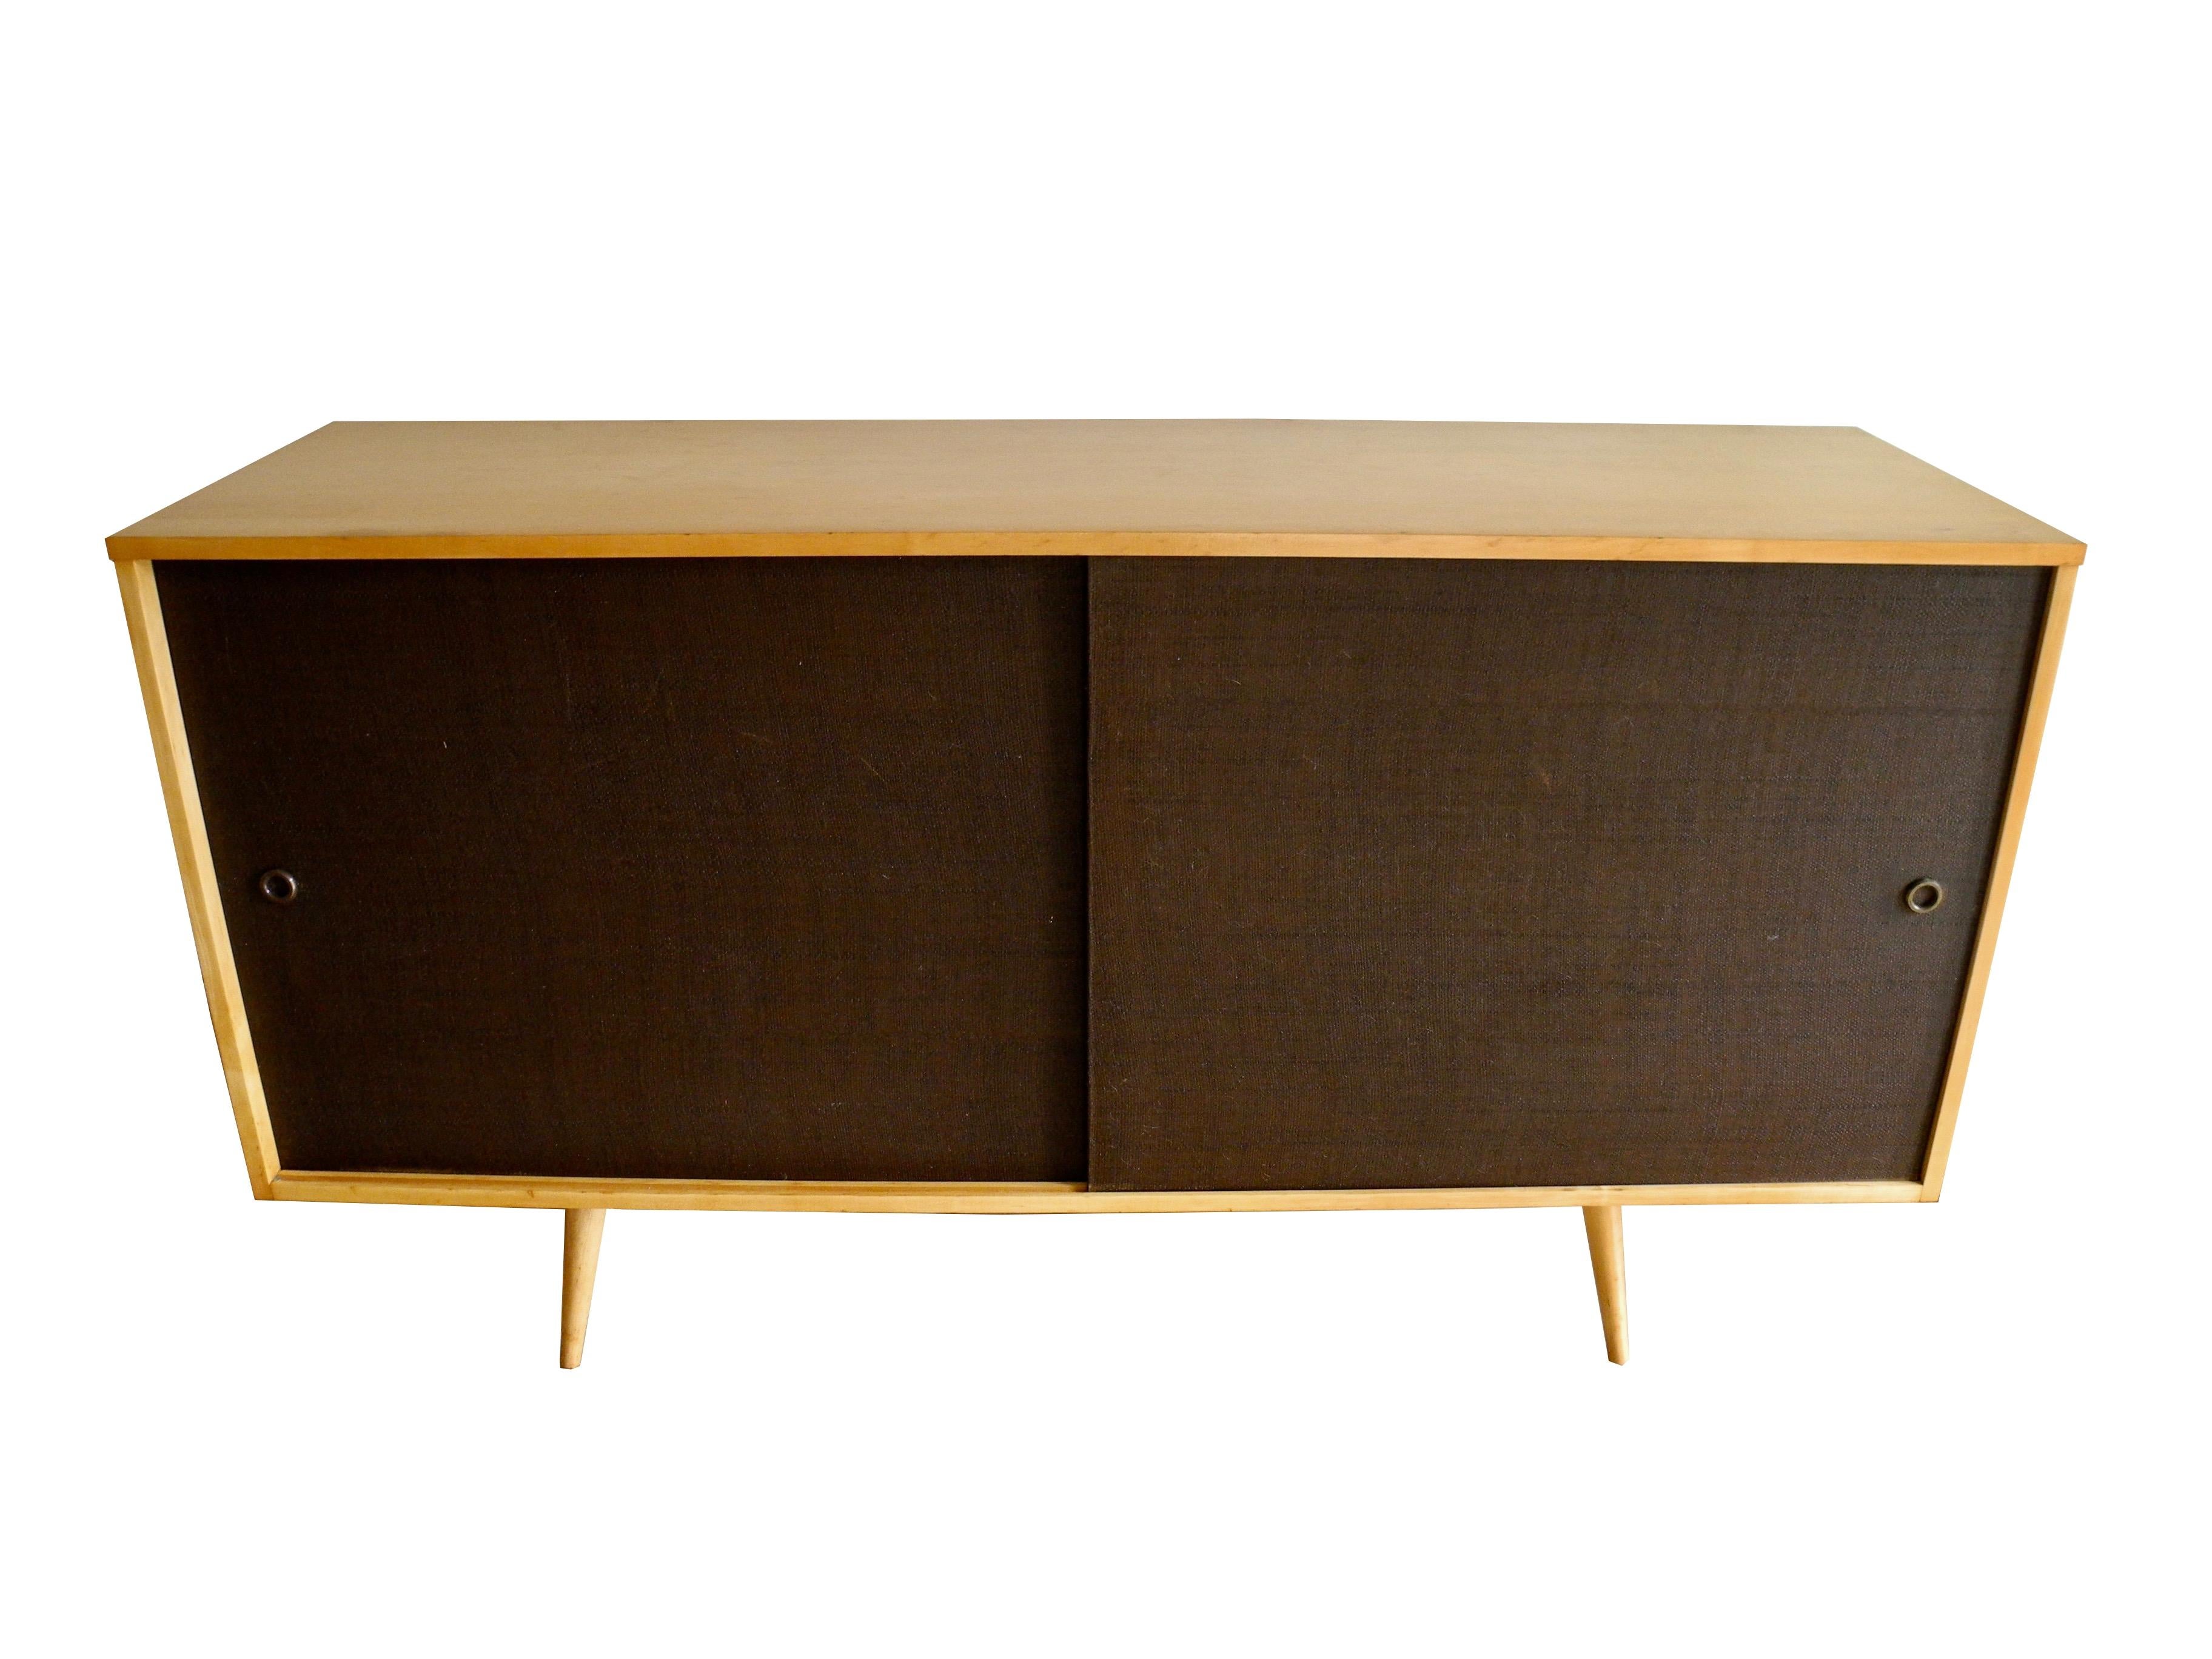 This well known Paul McCobb sideboard is made with solid maple wood. Equipped with four drawers and a shelf. The panel doors conveniently slide from side to side for easy access. The conical legs screw into wood cleats underneath the case. The